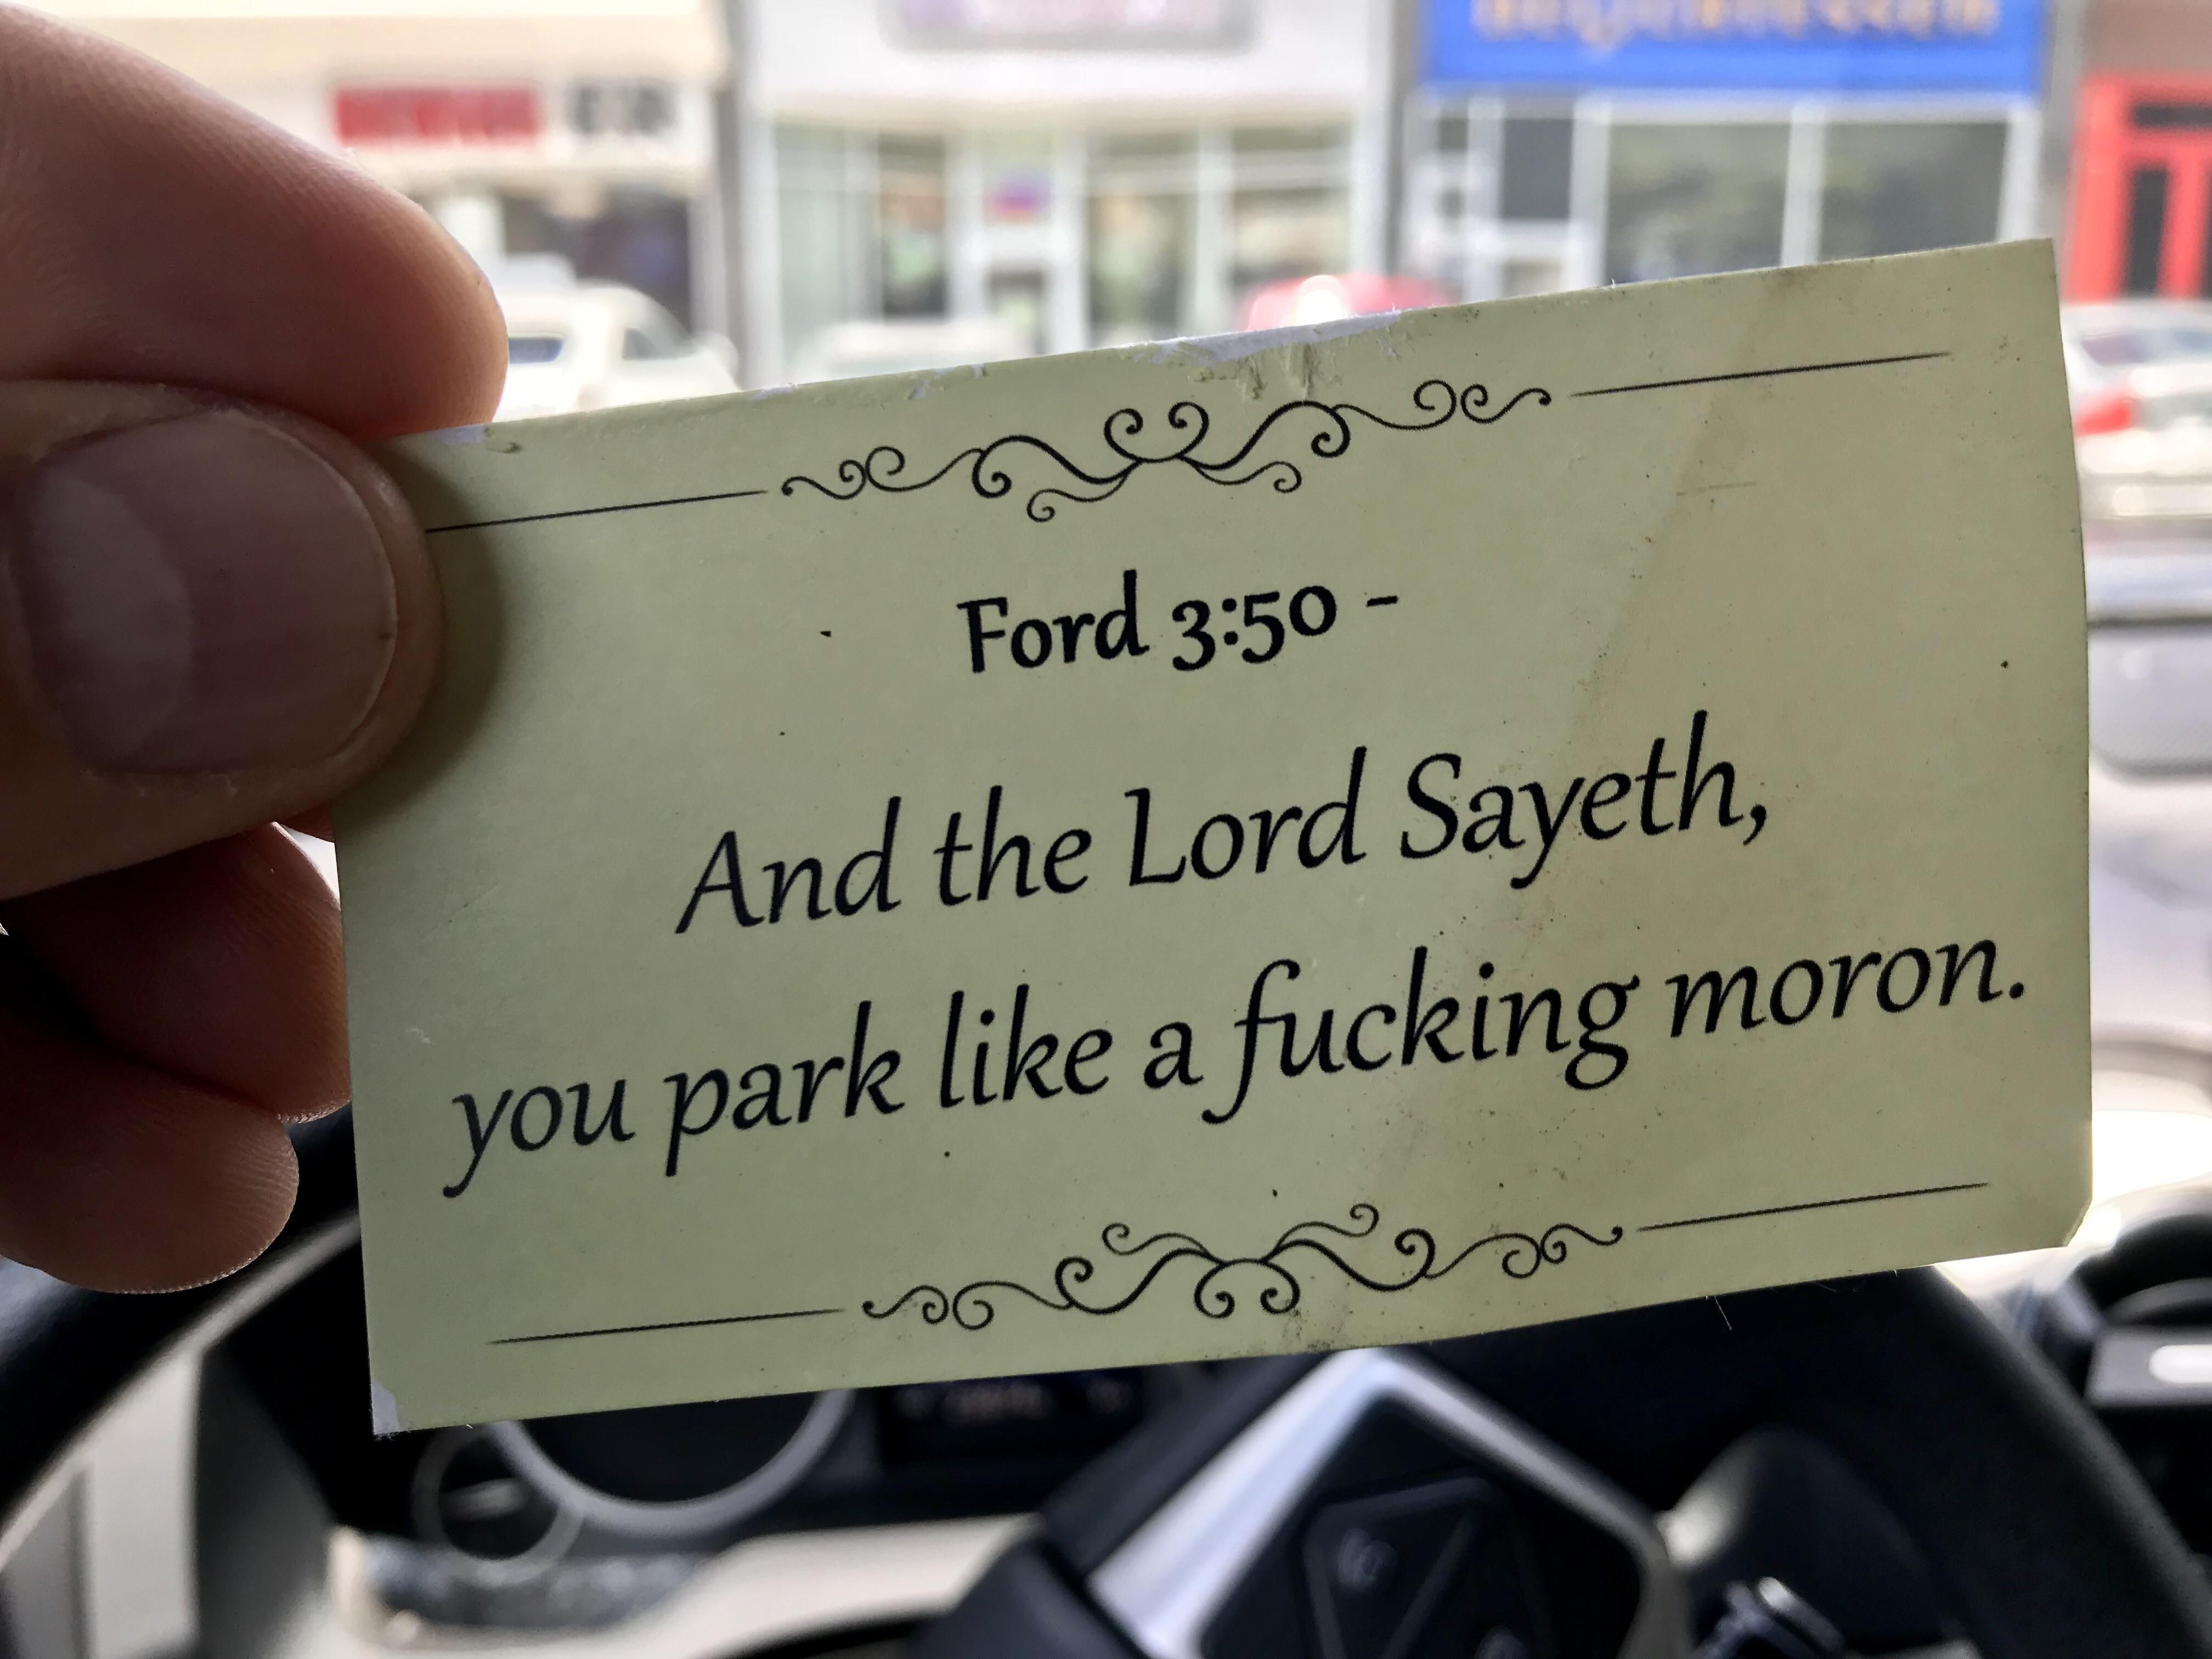 Forgive me father for I may have sinned: someone put this under the windshield wiper on my Tundra